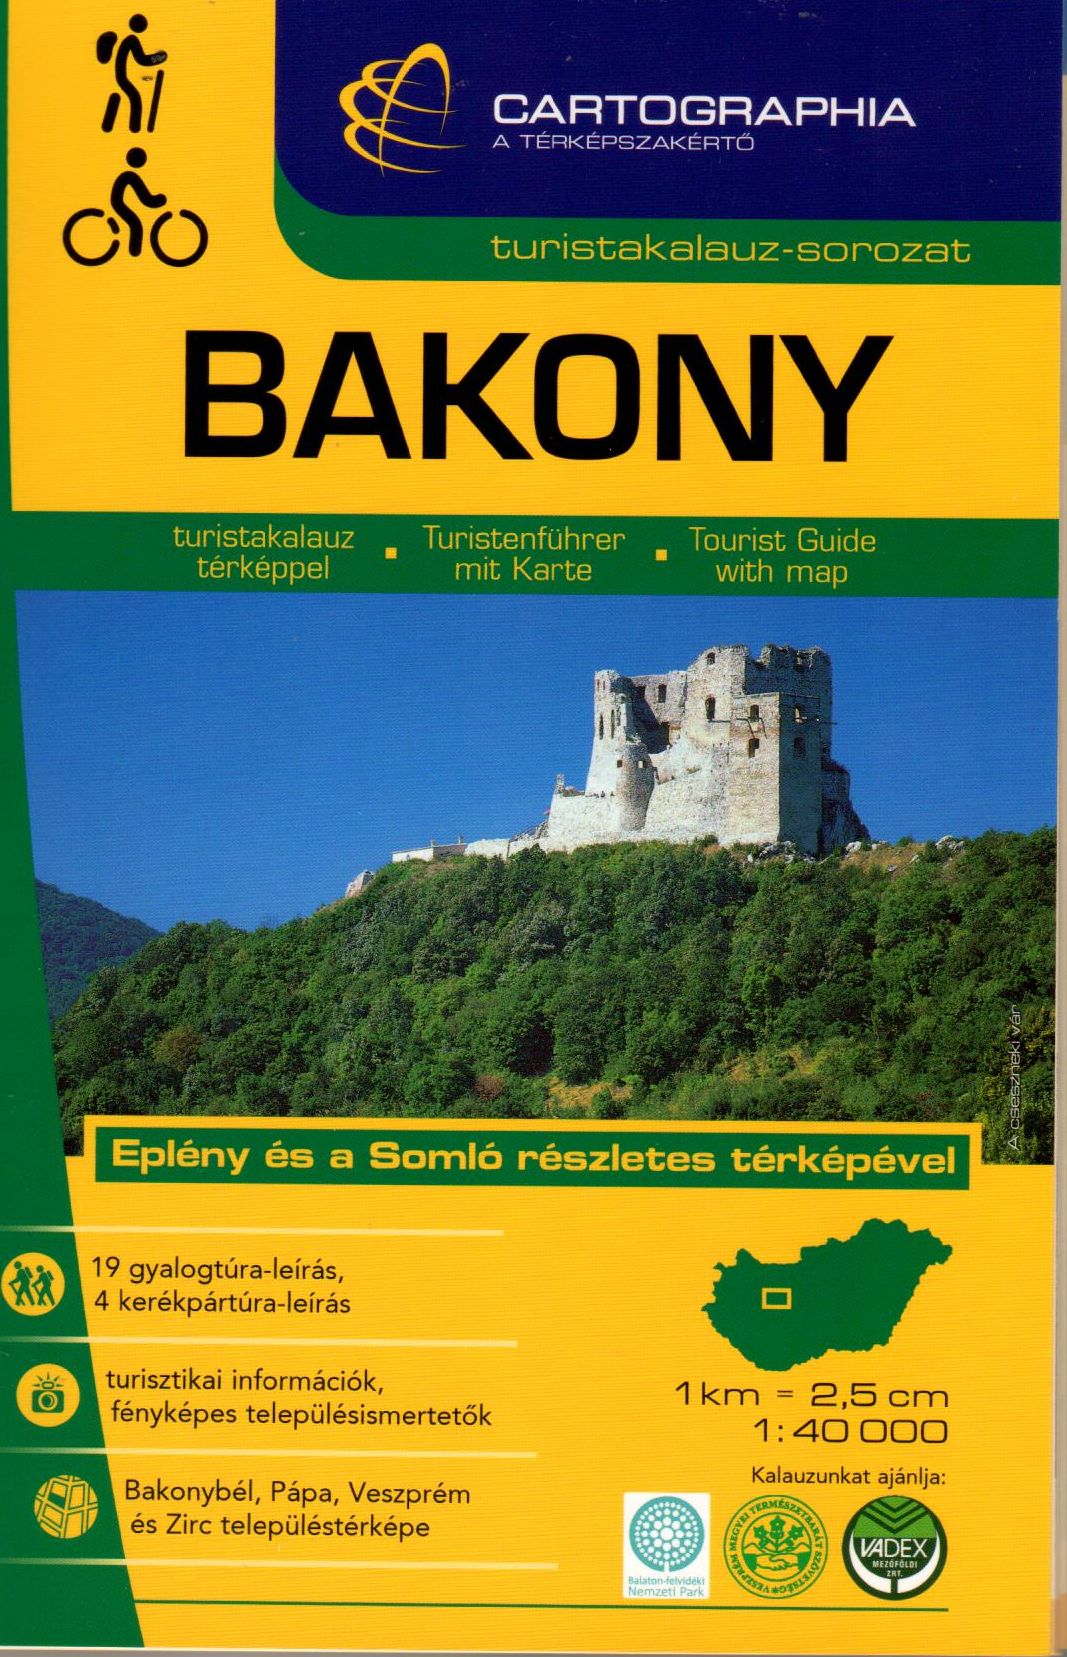 Detailed guide in Hungarian